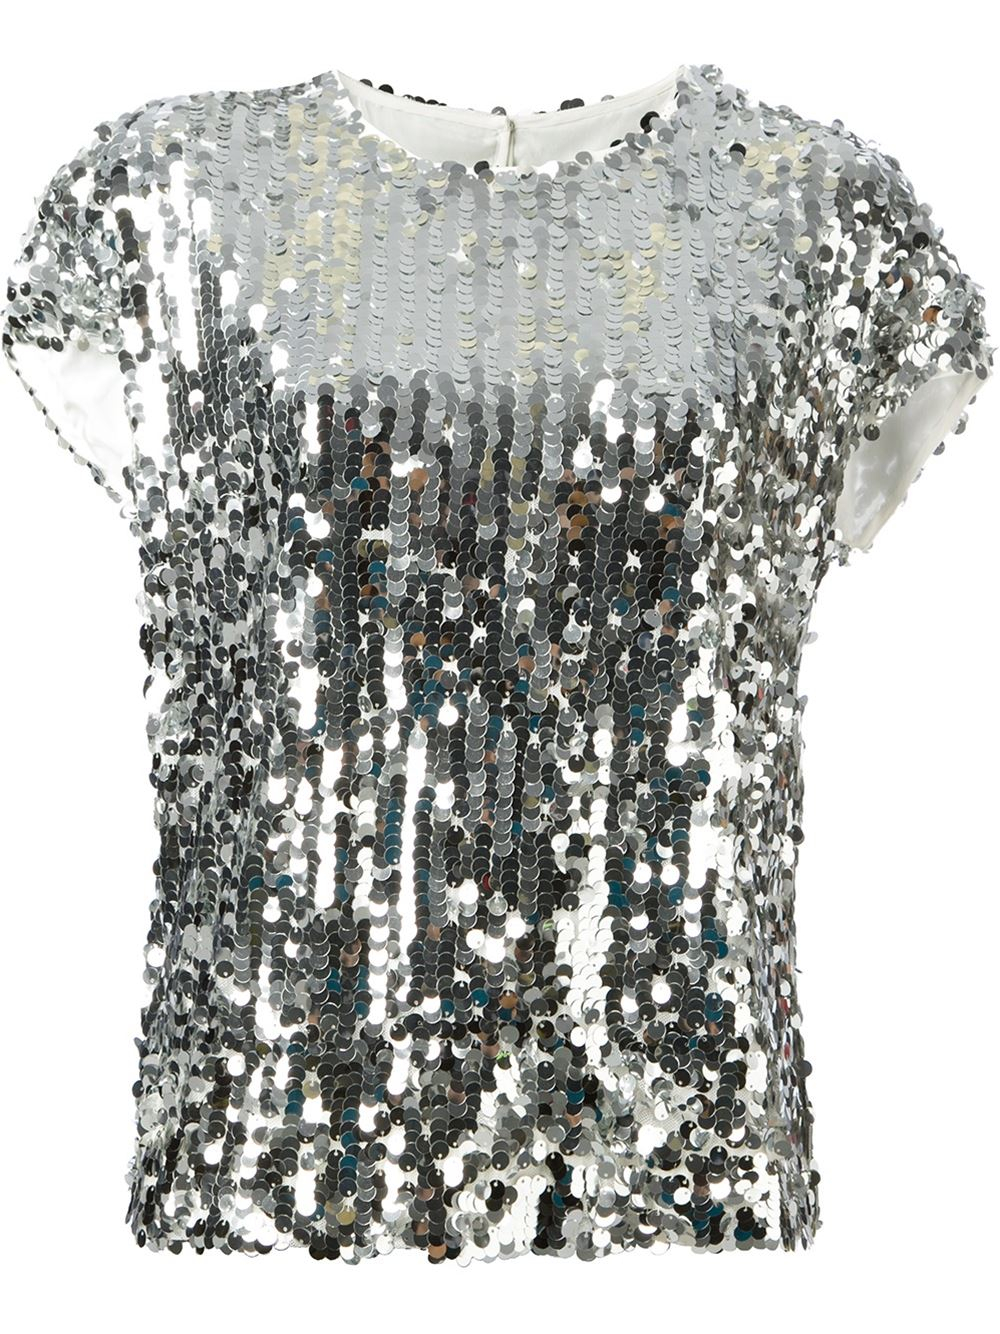 Dolce & gabbana Sequin Embellished Top in Silver (metallic) | Lyst